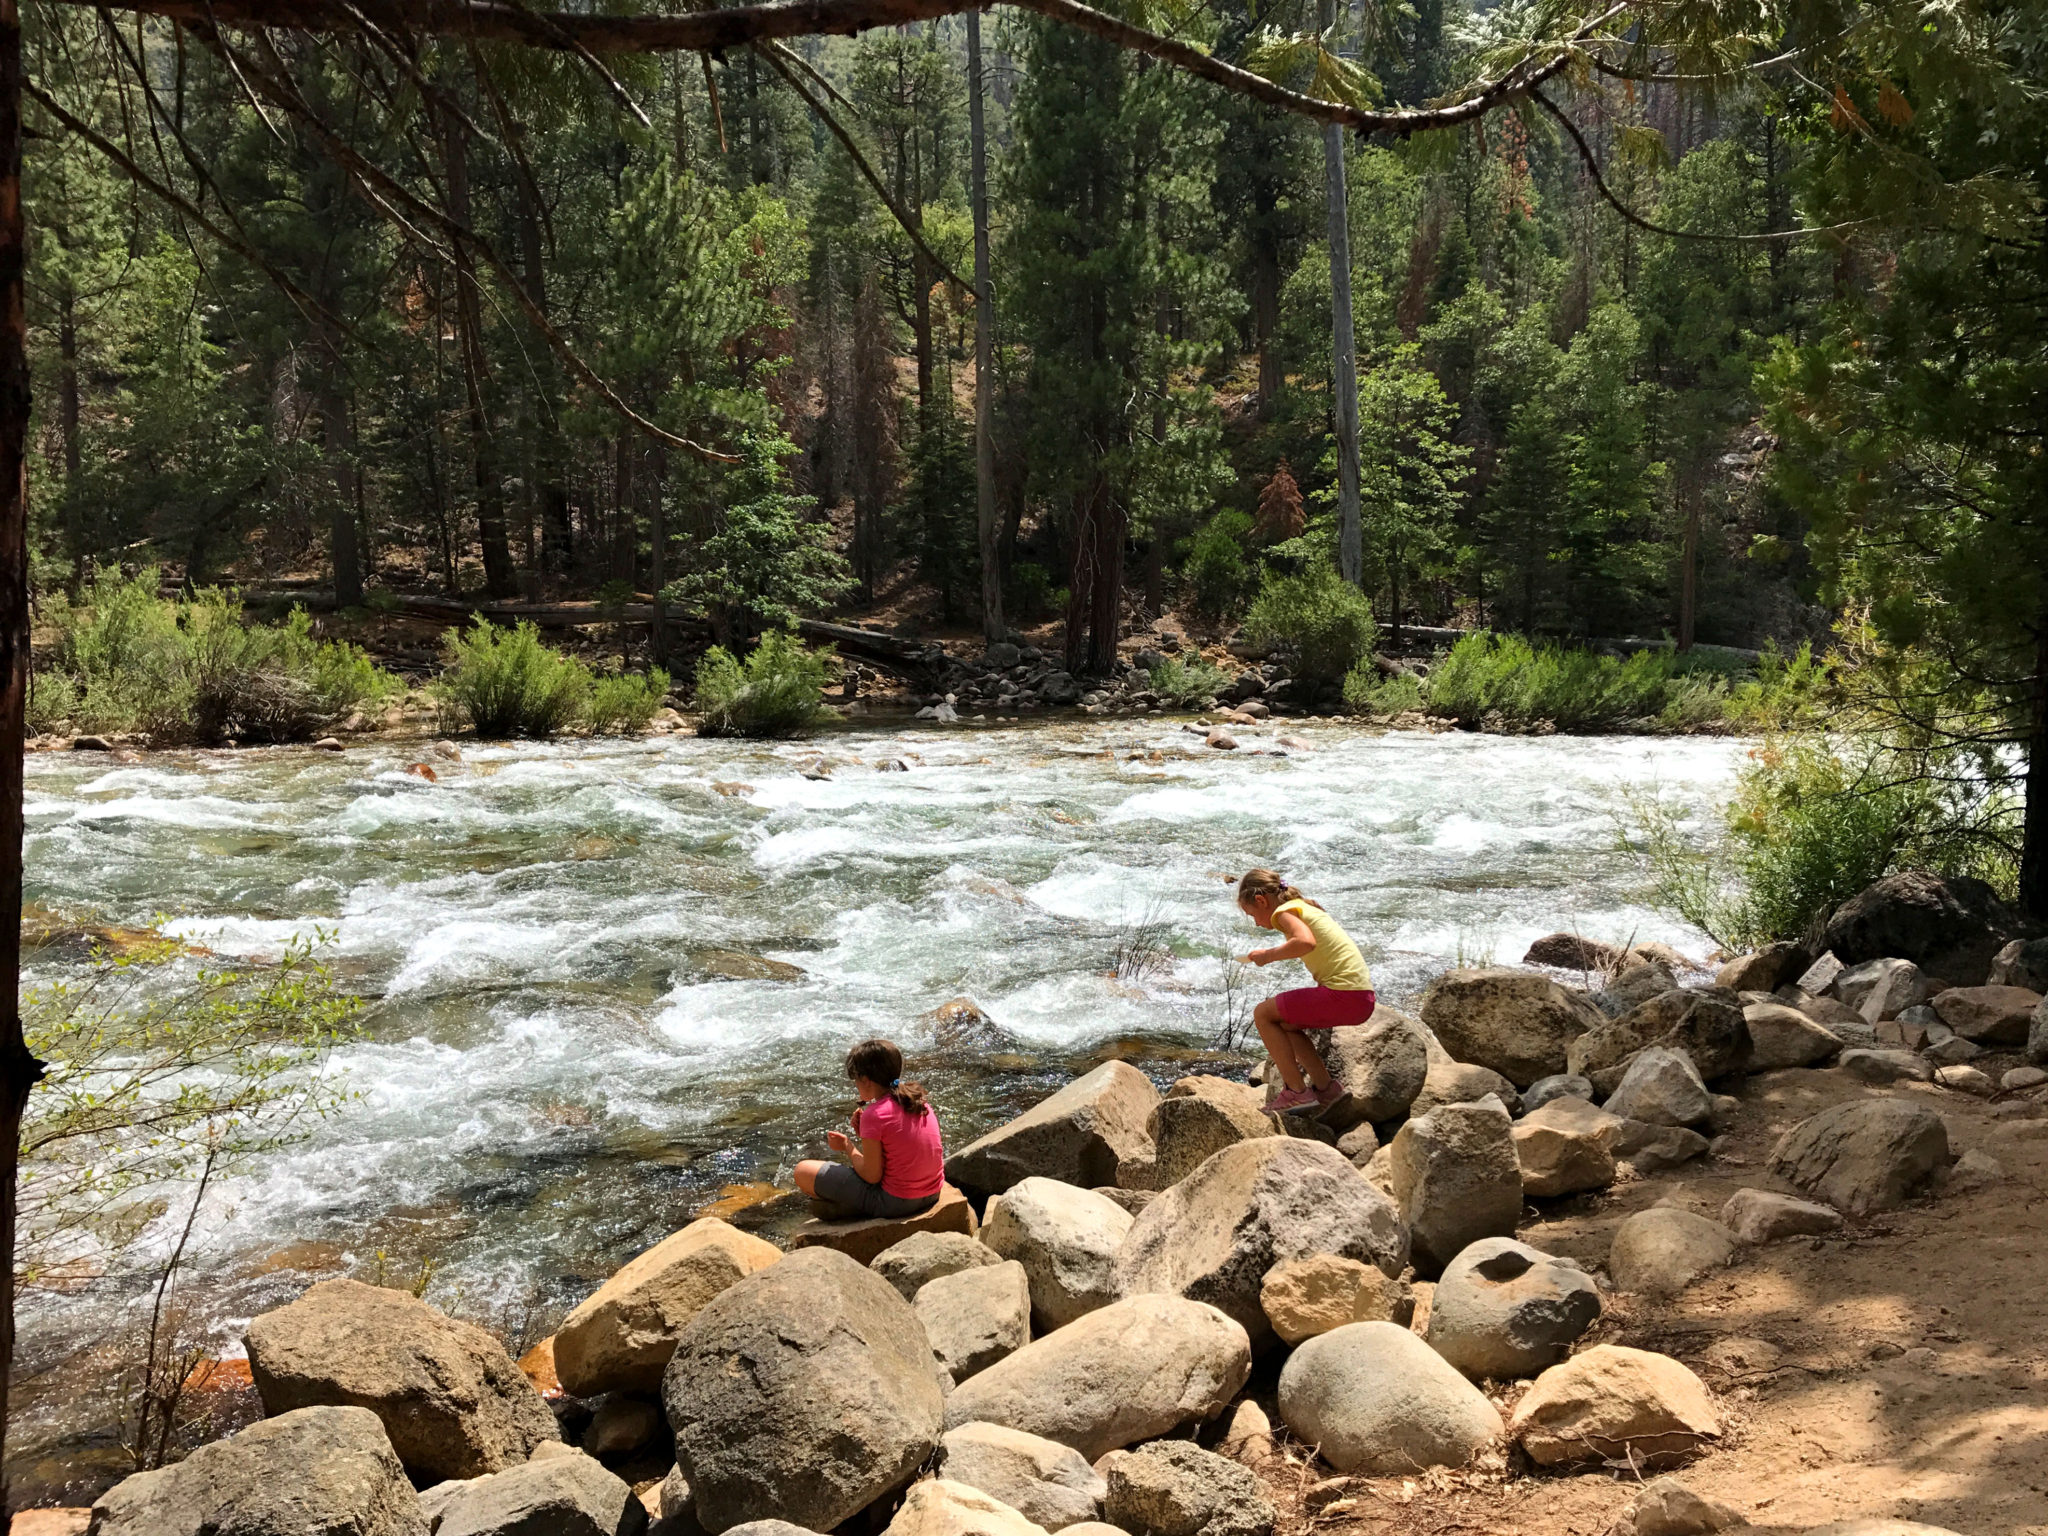 The kids near the Kings River